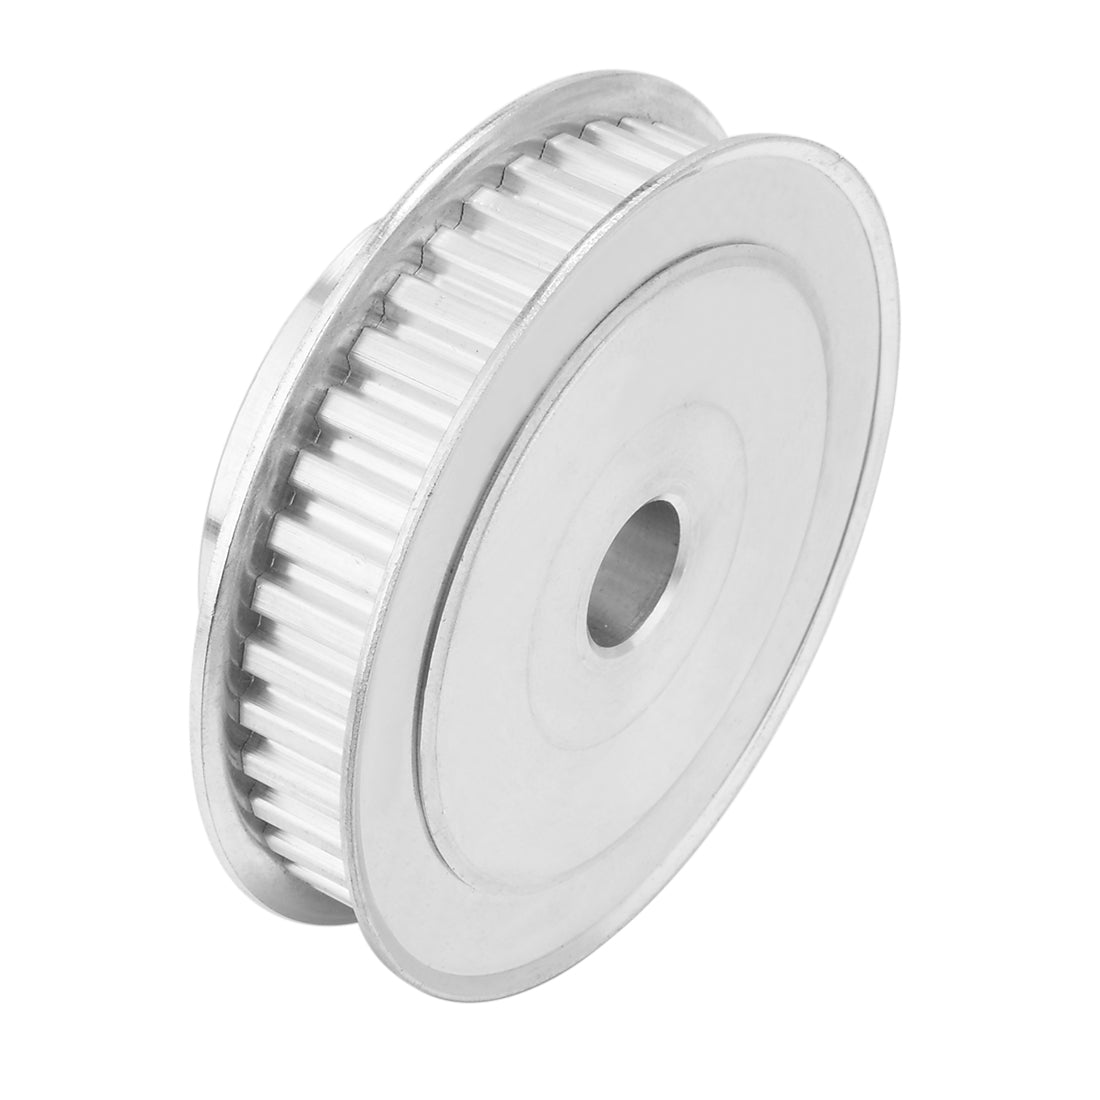 uxcell Uxcell Aluminum 40 Teeth 12mm Bore 5.08mm Pitch Timing Belt Pulley for 10mm Belt